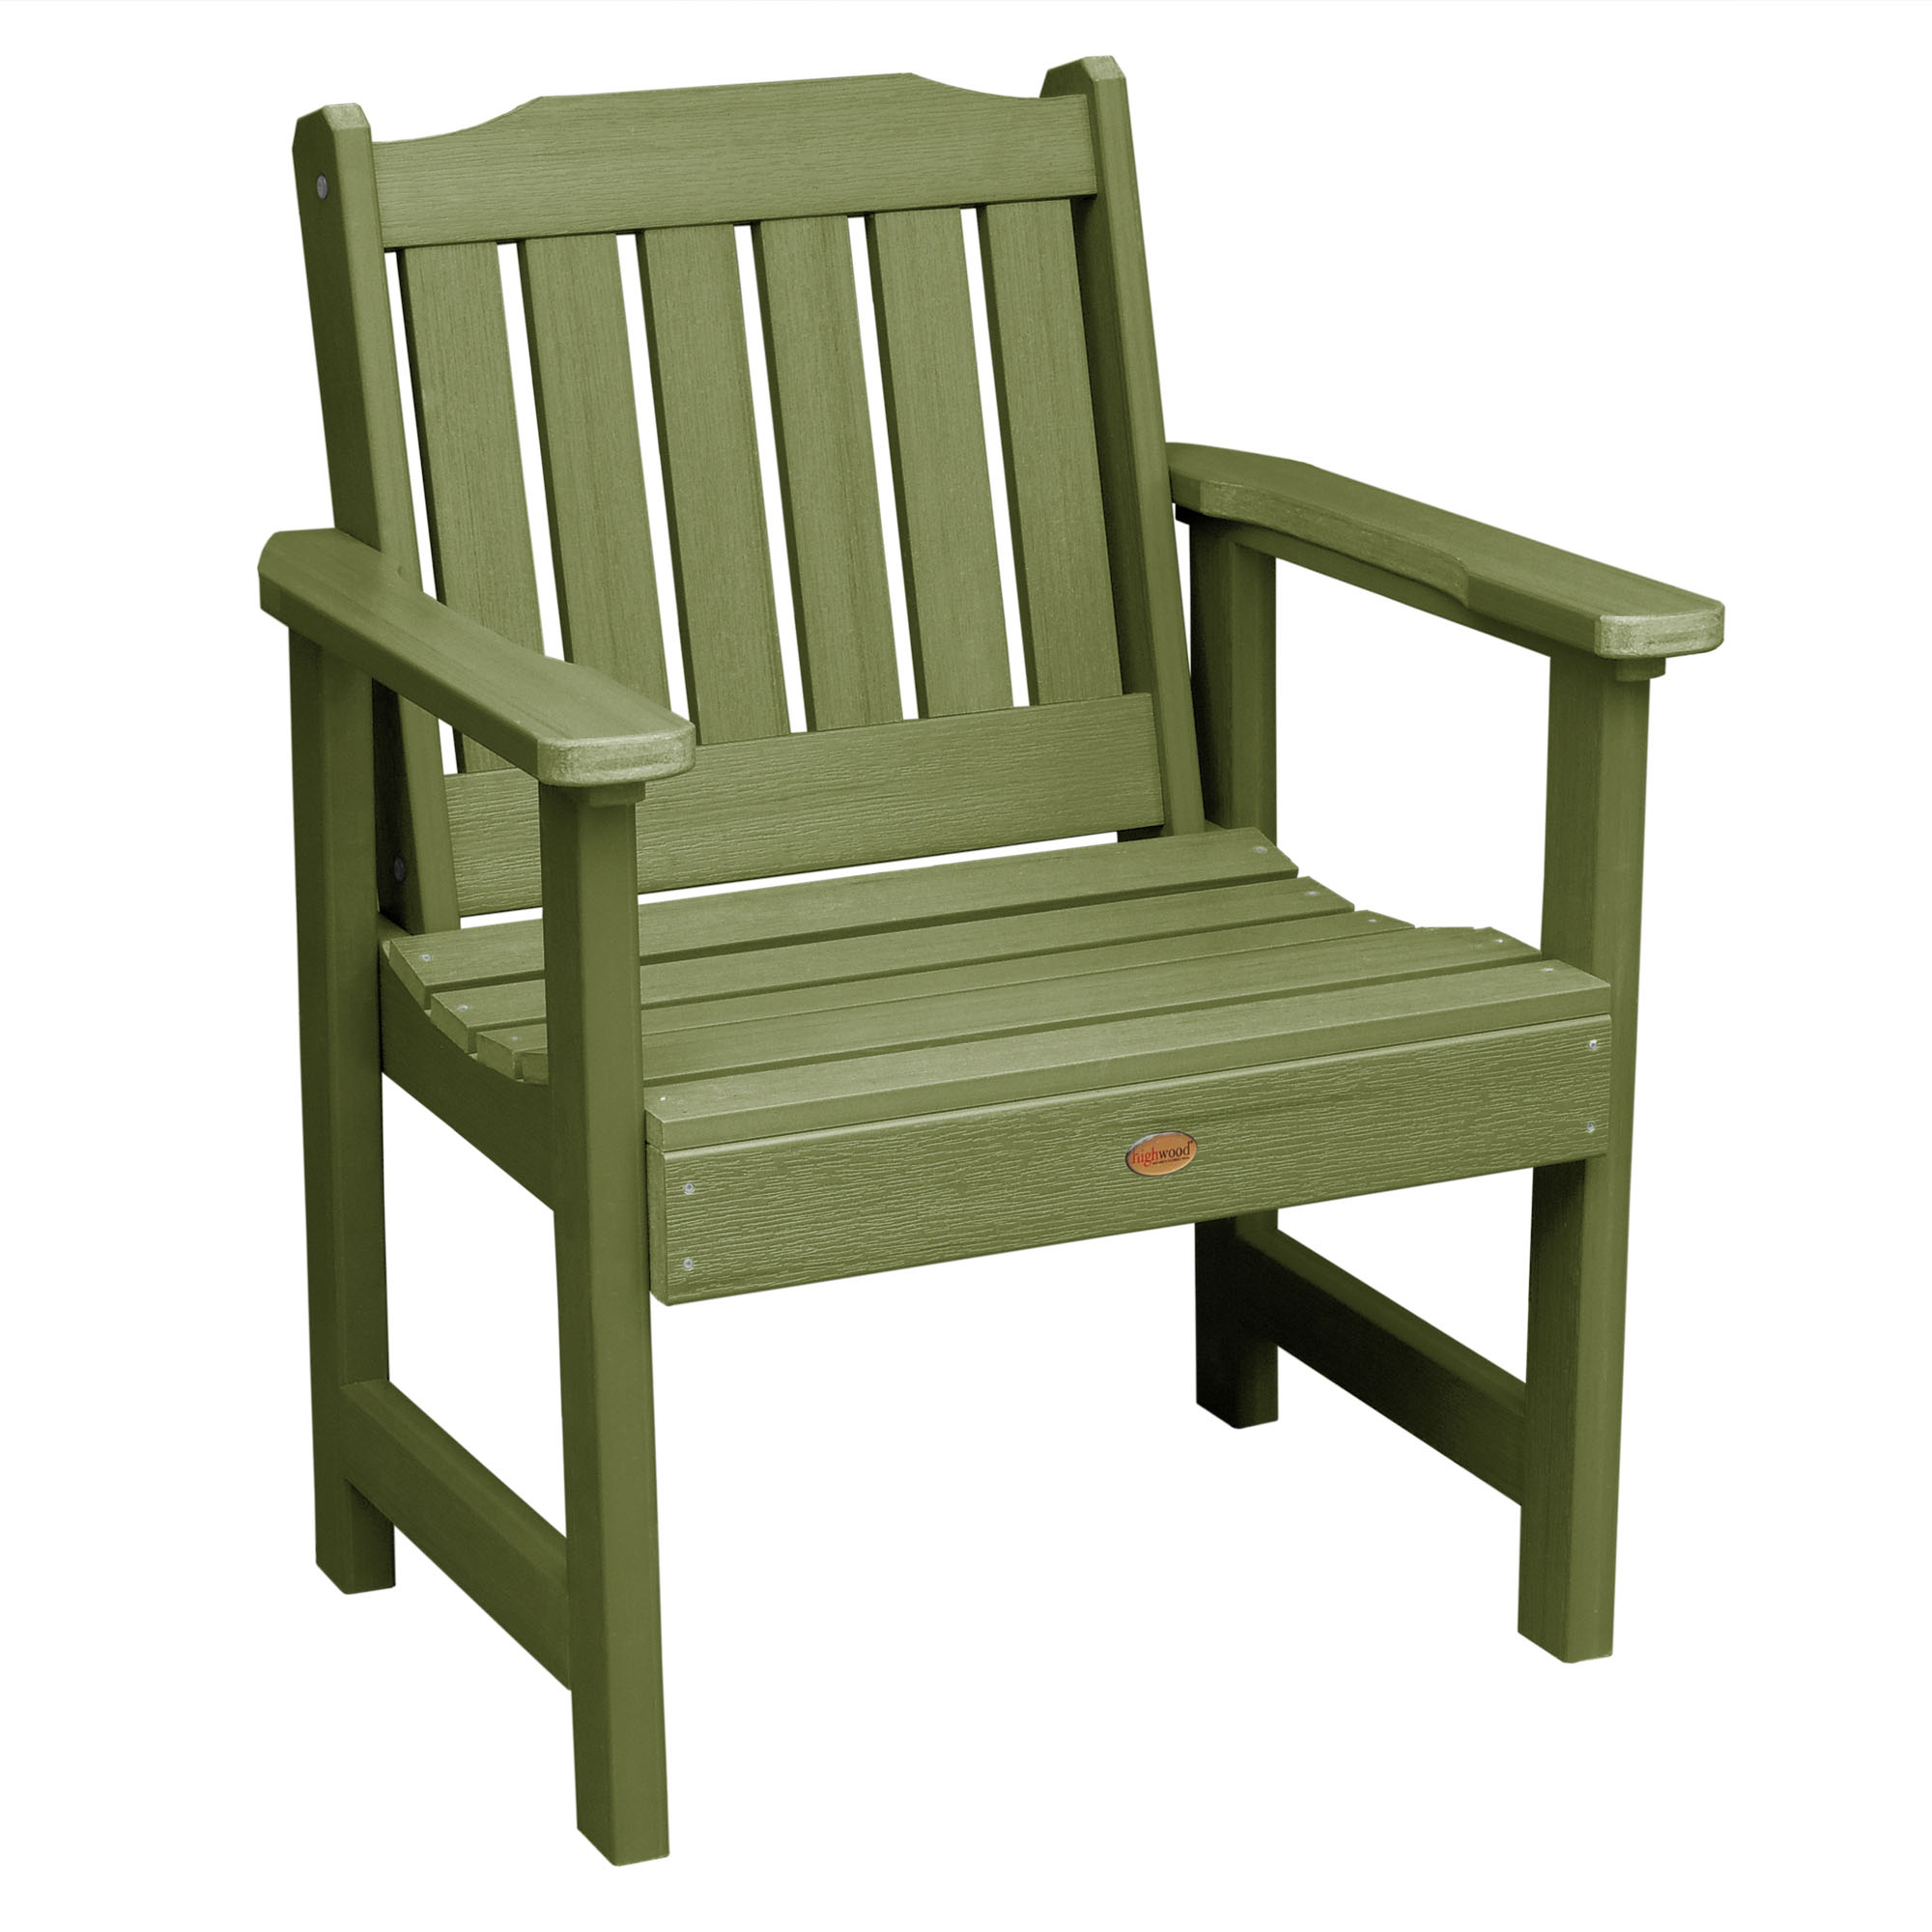 2 Lehigh Garden Chairs with 1 Square Side Table - image 2 of 16